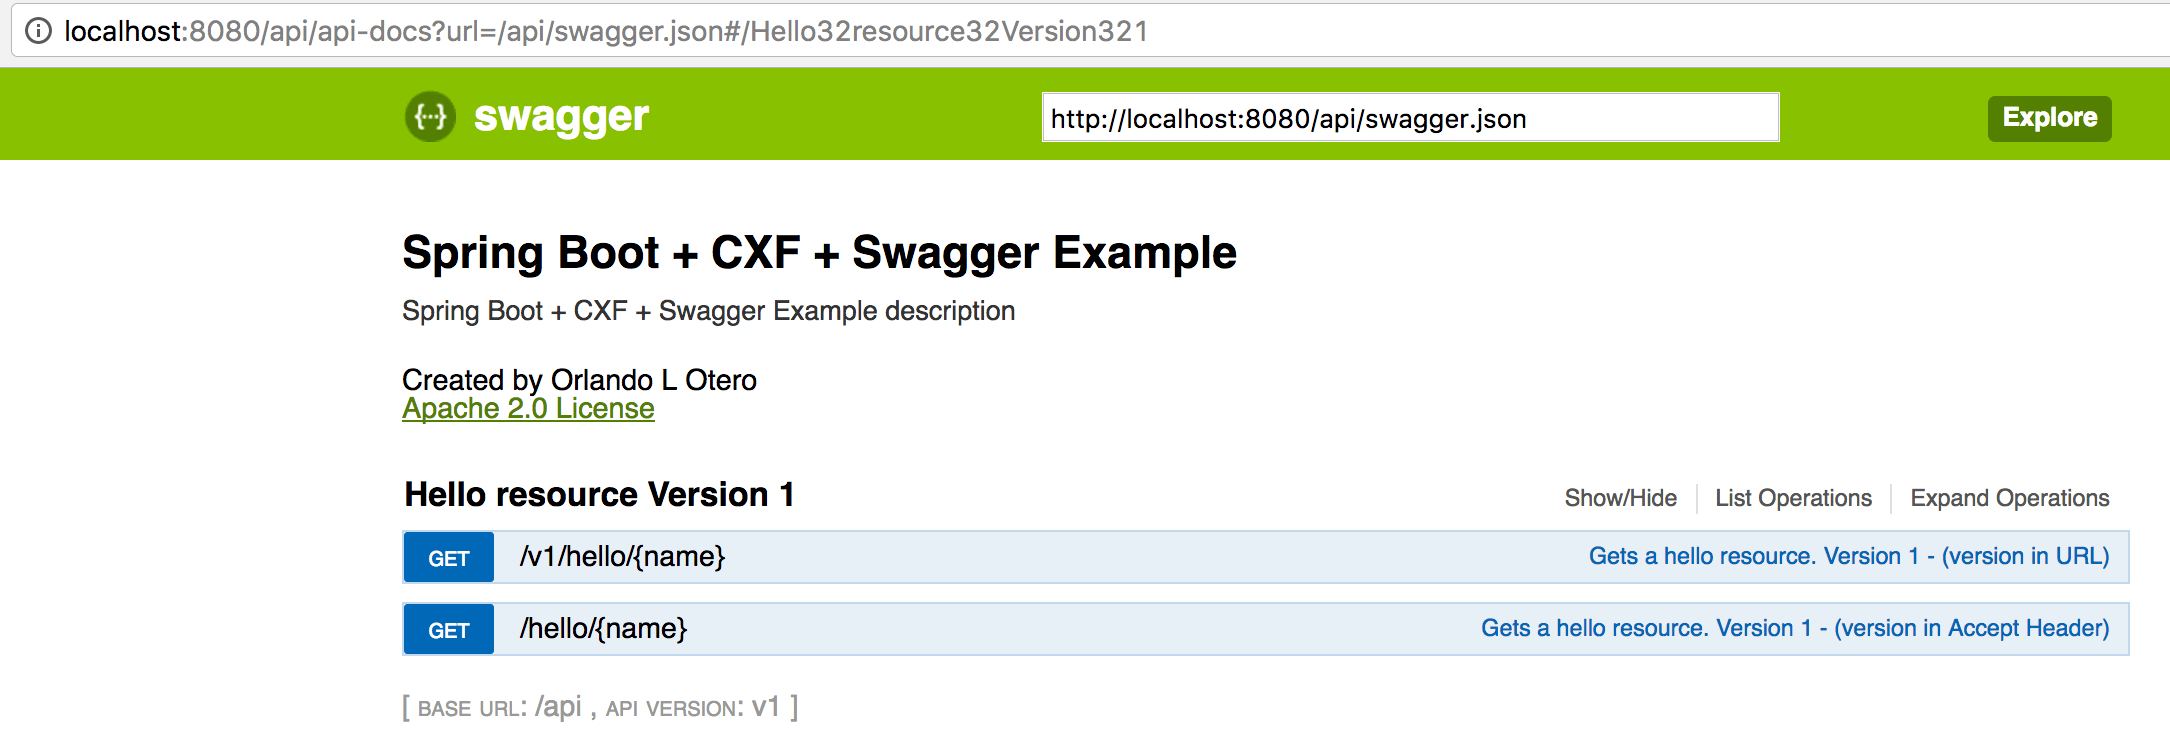 Swagger, Spring Boot, CXF - Hello Resource endpoints